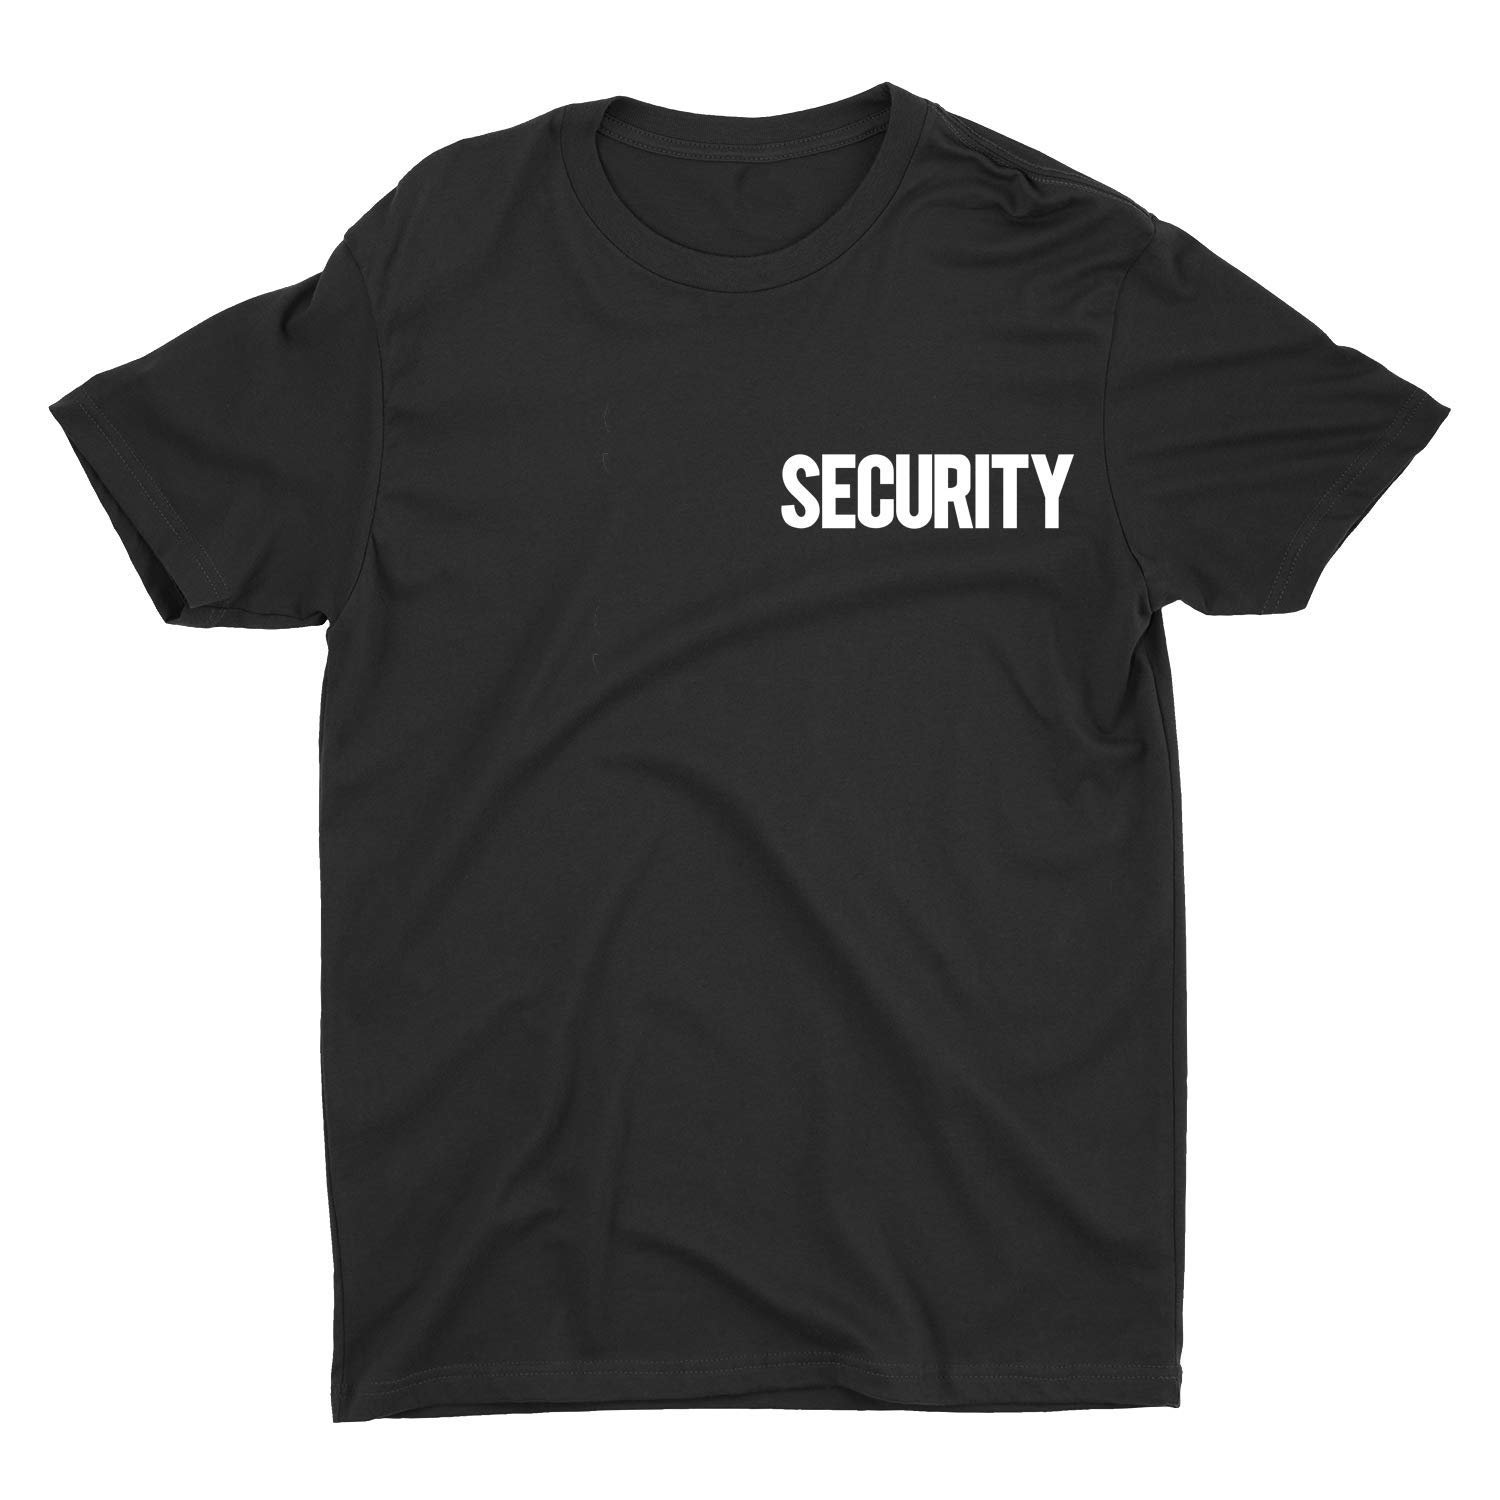 NYC Factory Men's Neon Security T-Shirt Chest Back Print Tee